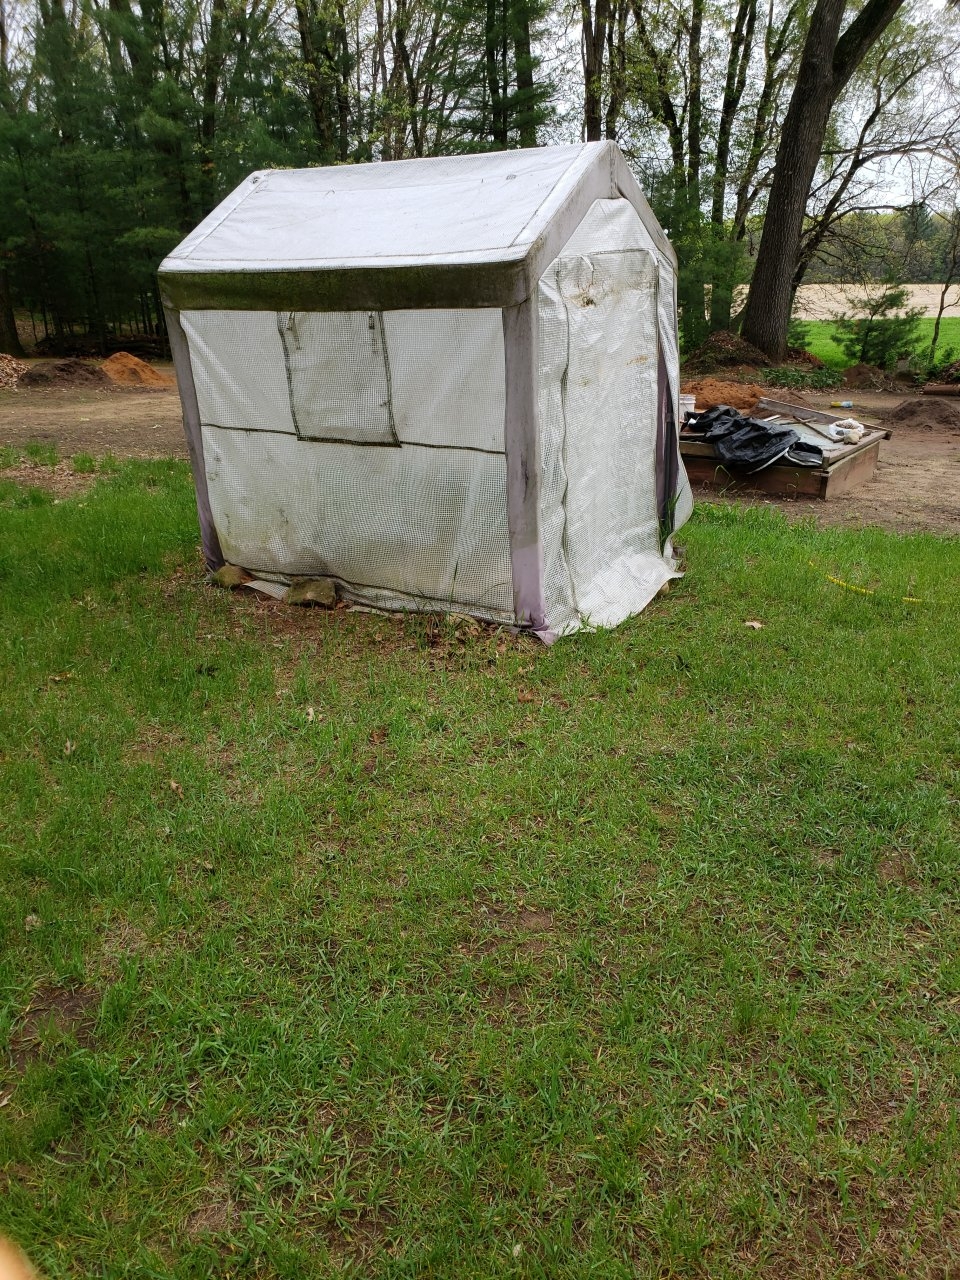 This is the greenhouse I'm using currently